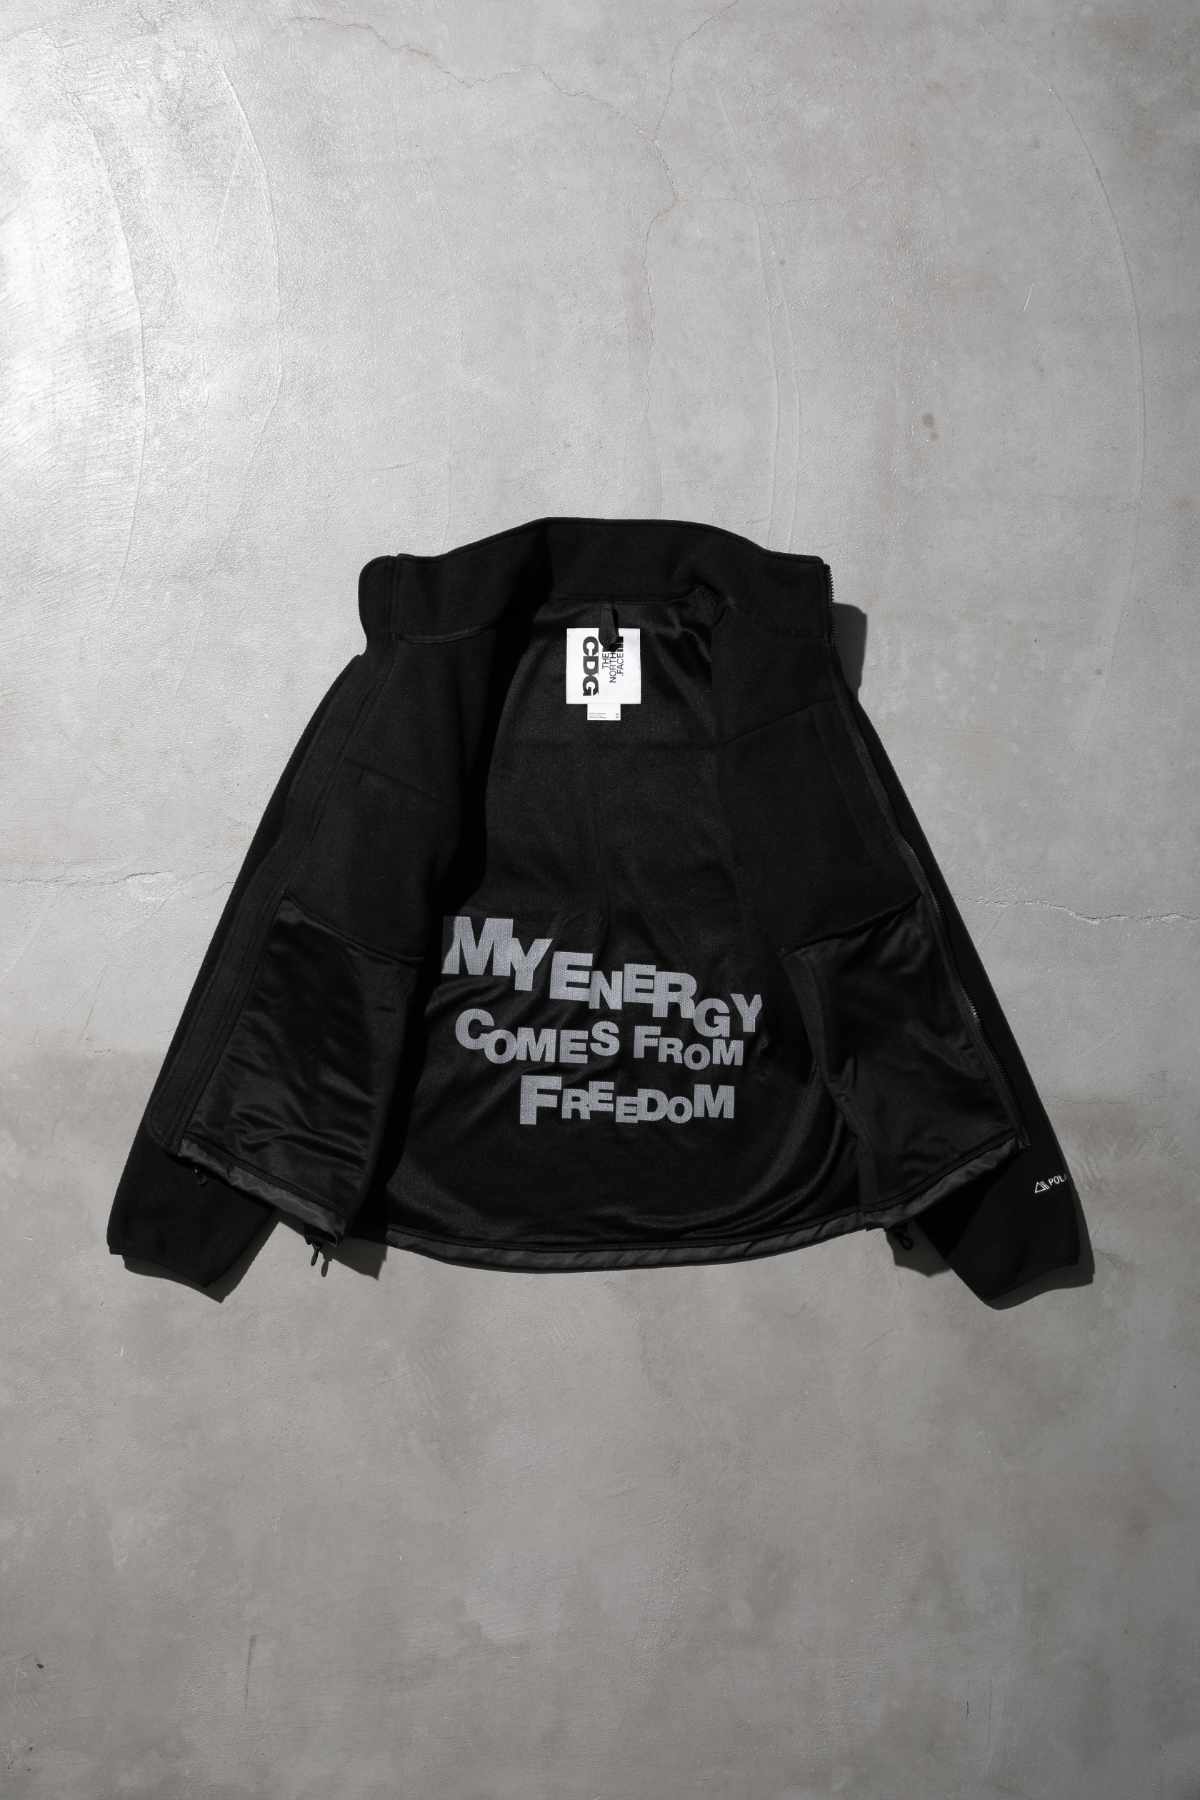 CDG x The North Face's black jacket collaboration